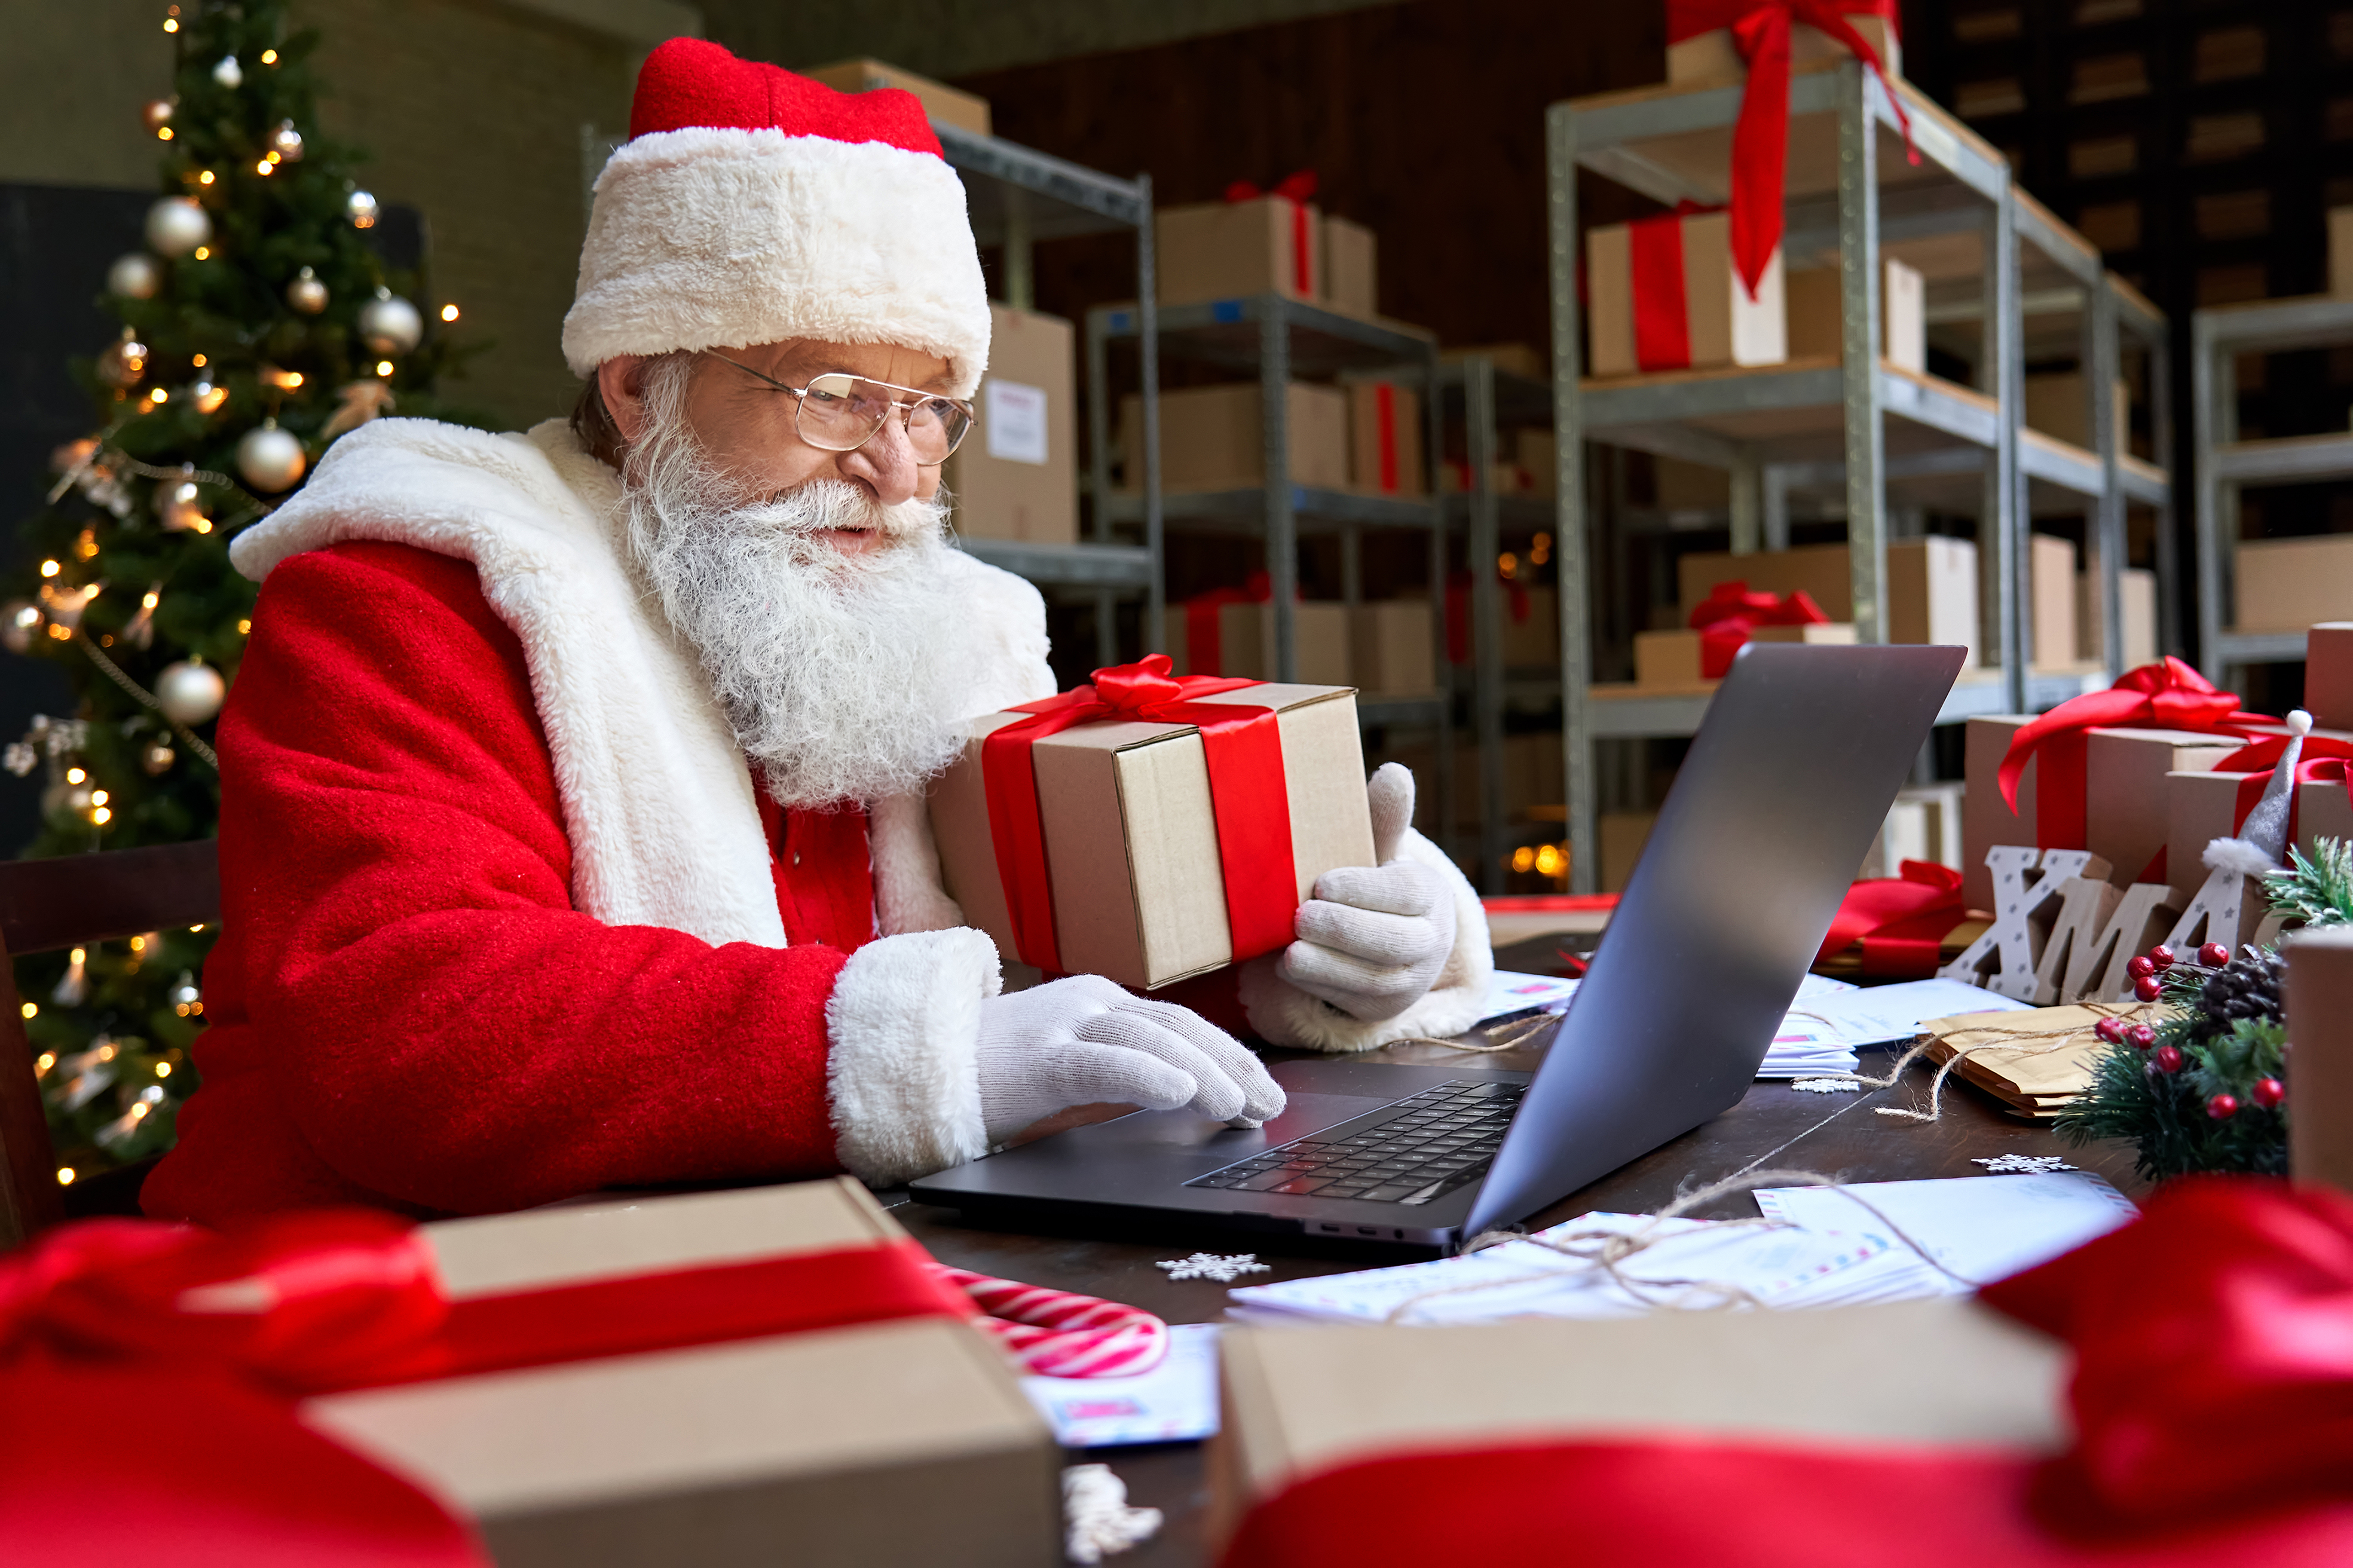 father christmas buying virtual gifts on a laptop